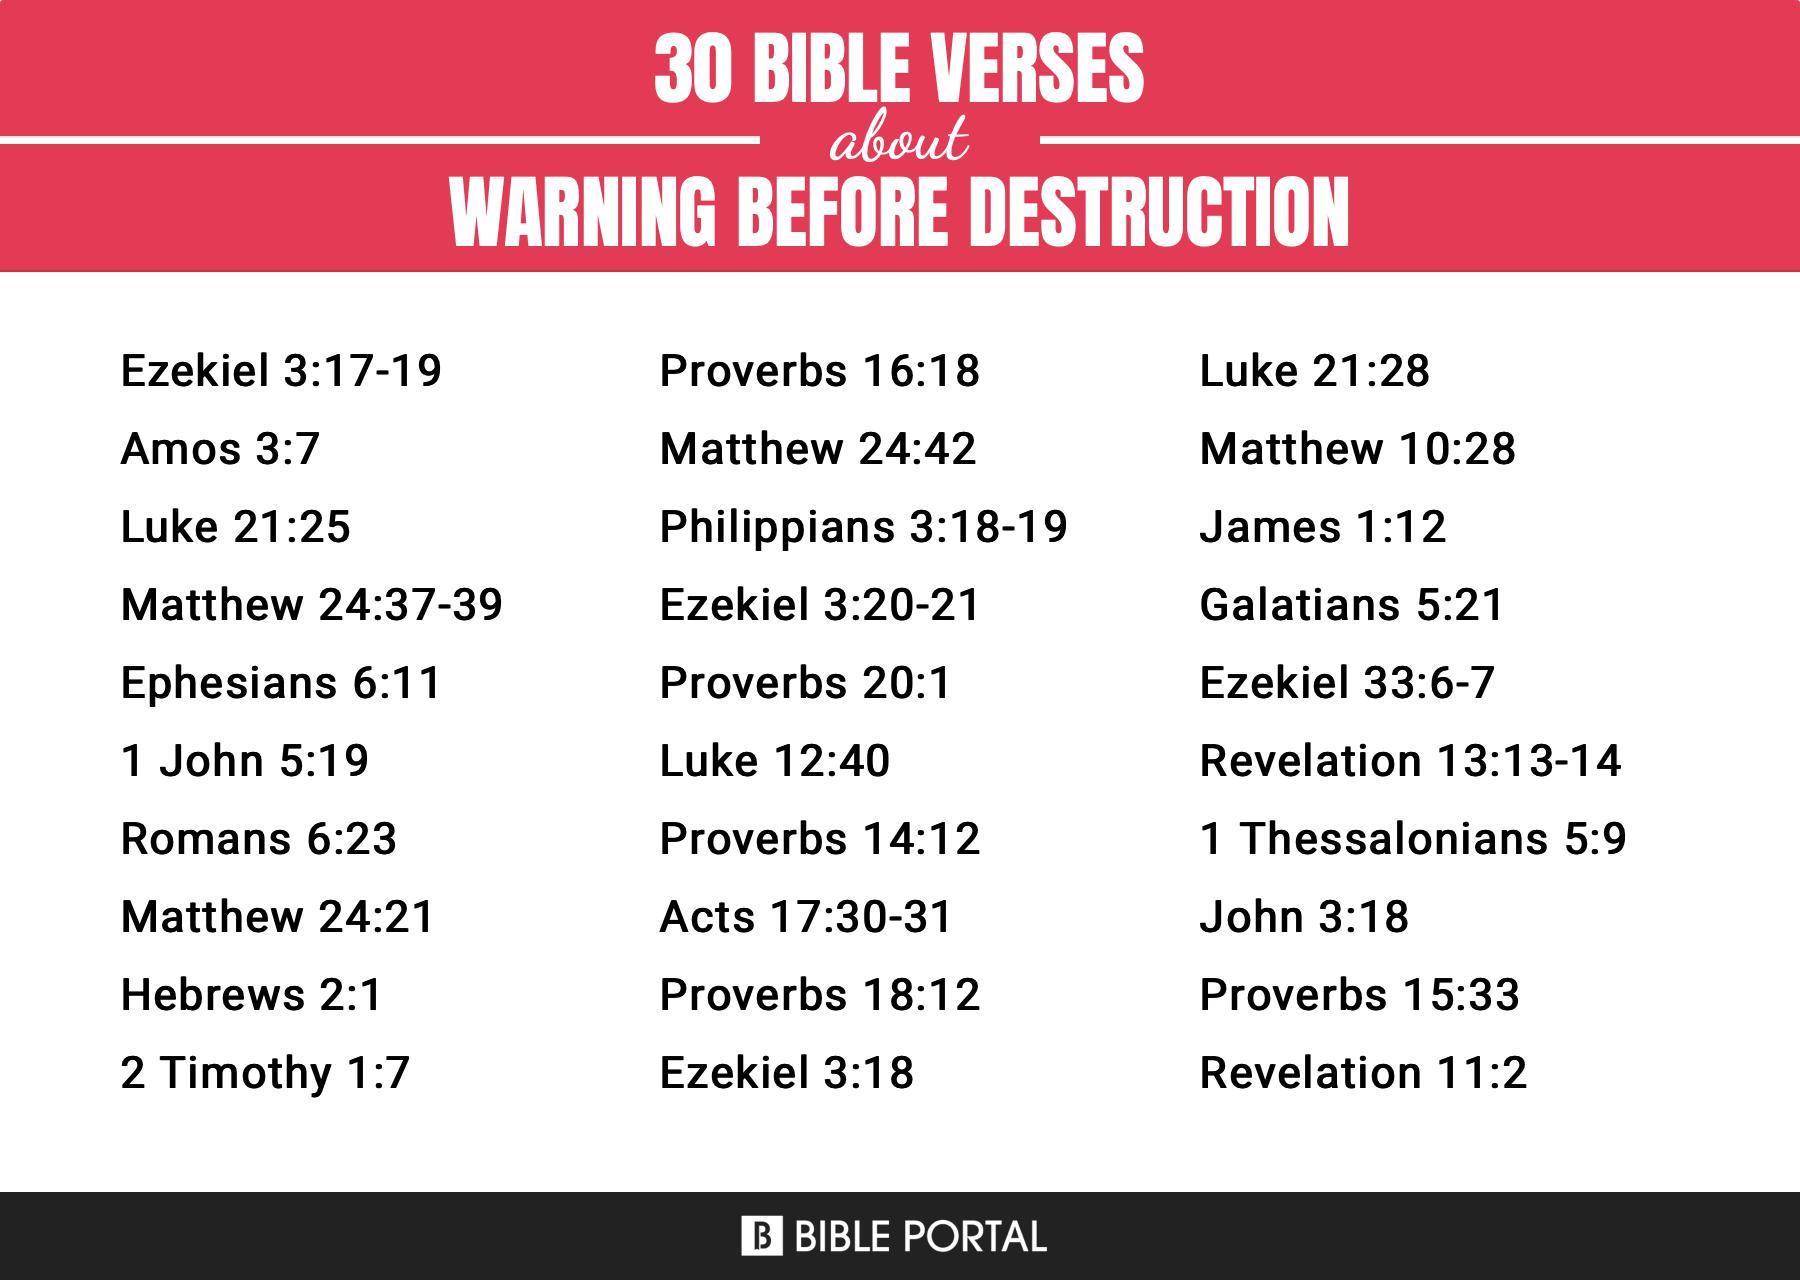 What Does the Bible Say about Warning Before Destruction?